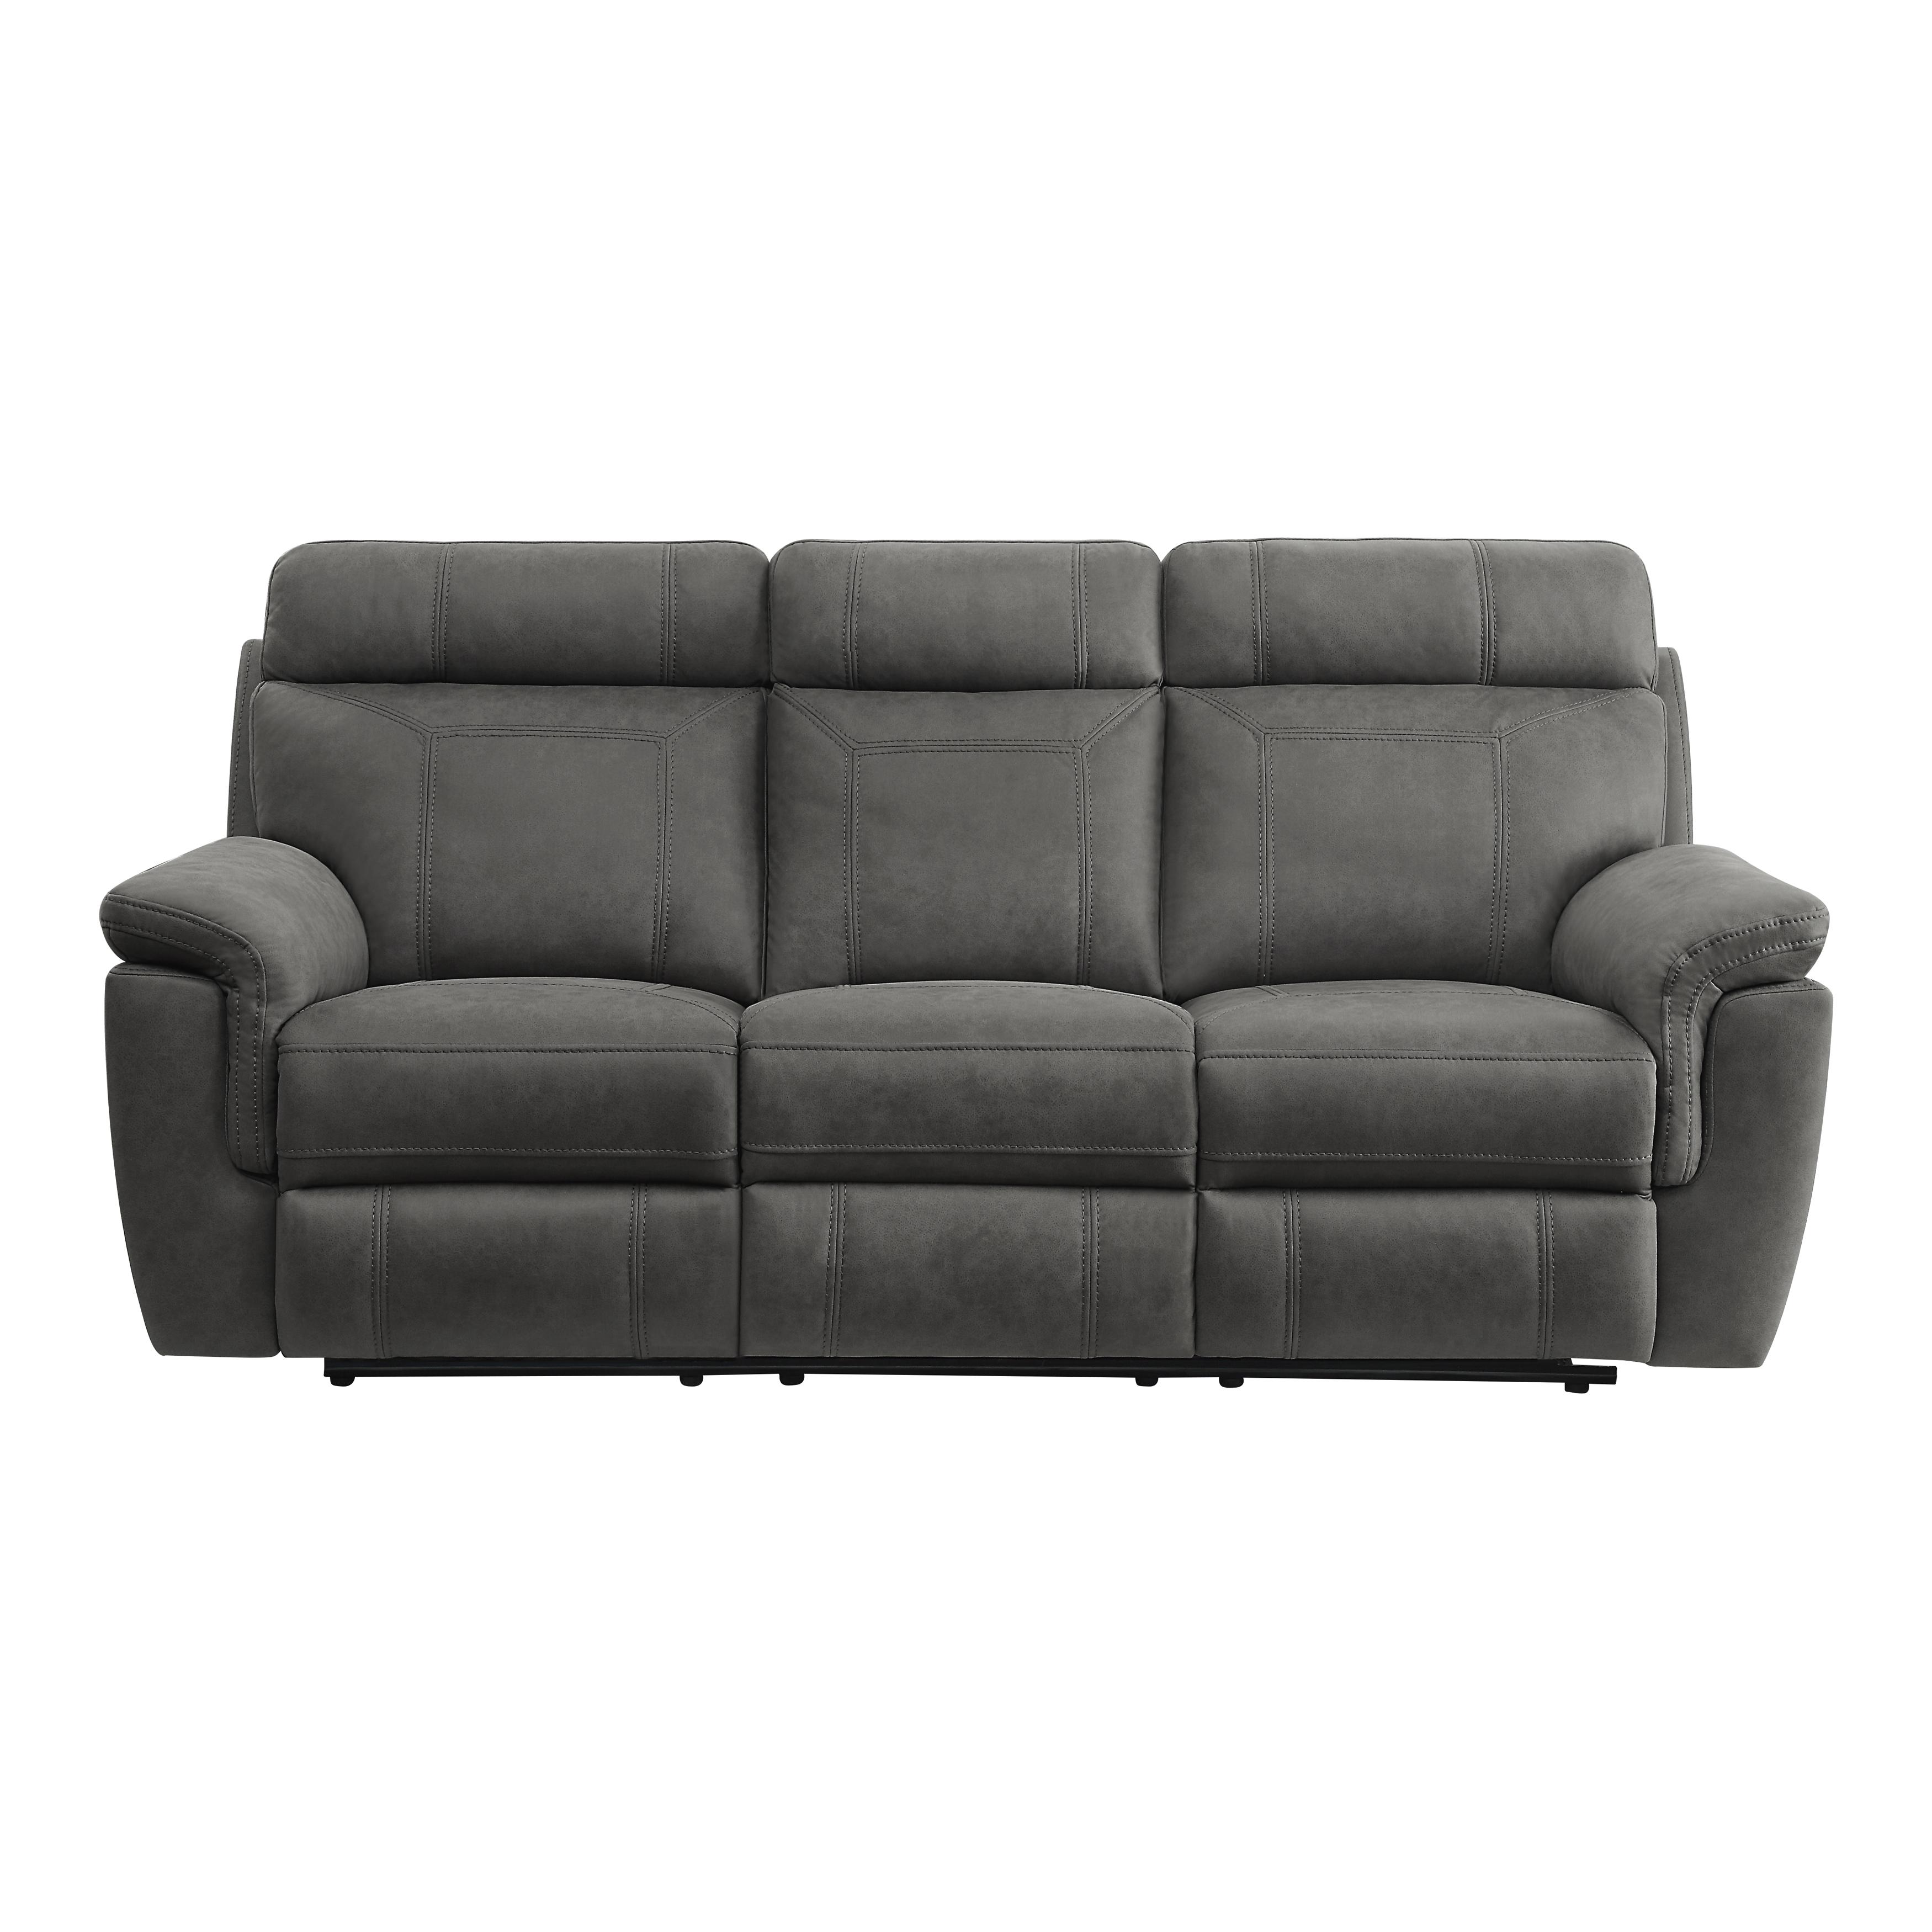 Modern Reclining Sofa 9301GRY-3 Clifton 9301GRY-3 in Gray Microfiber